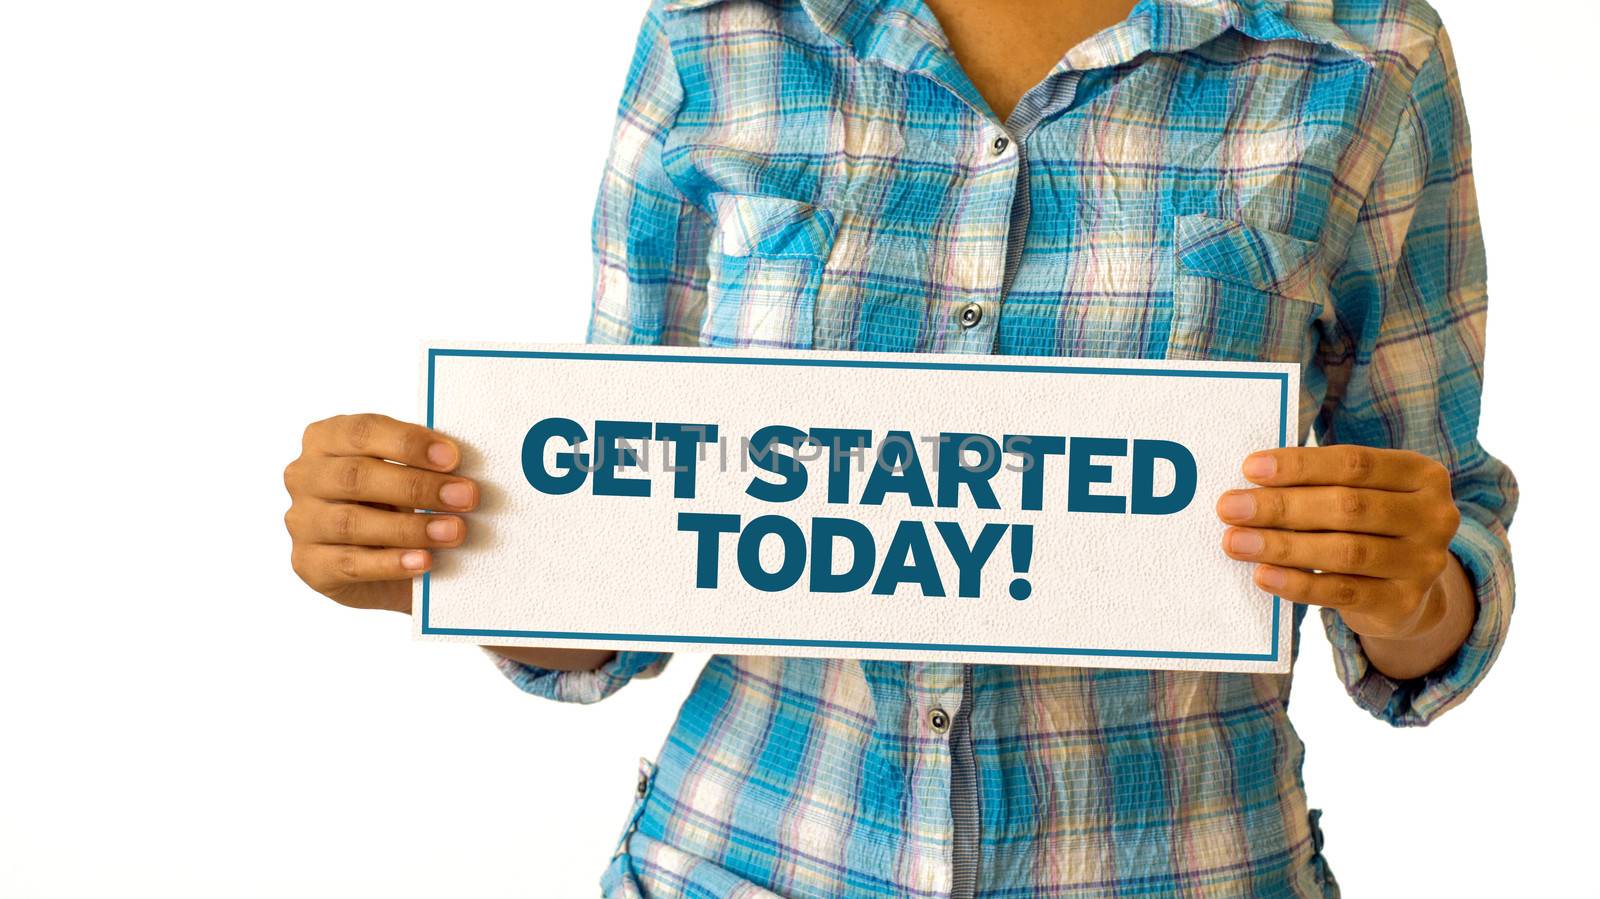 Get Started Today by kbuntu